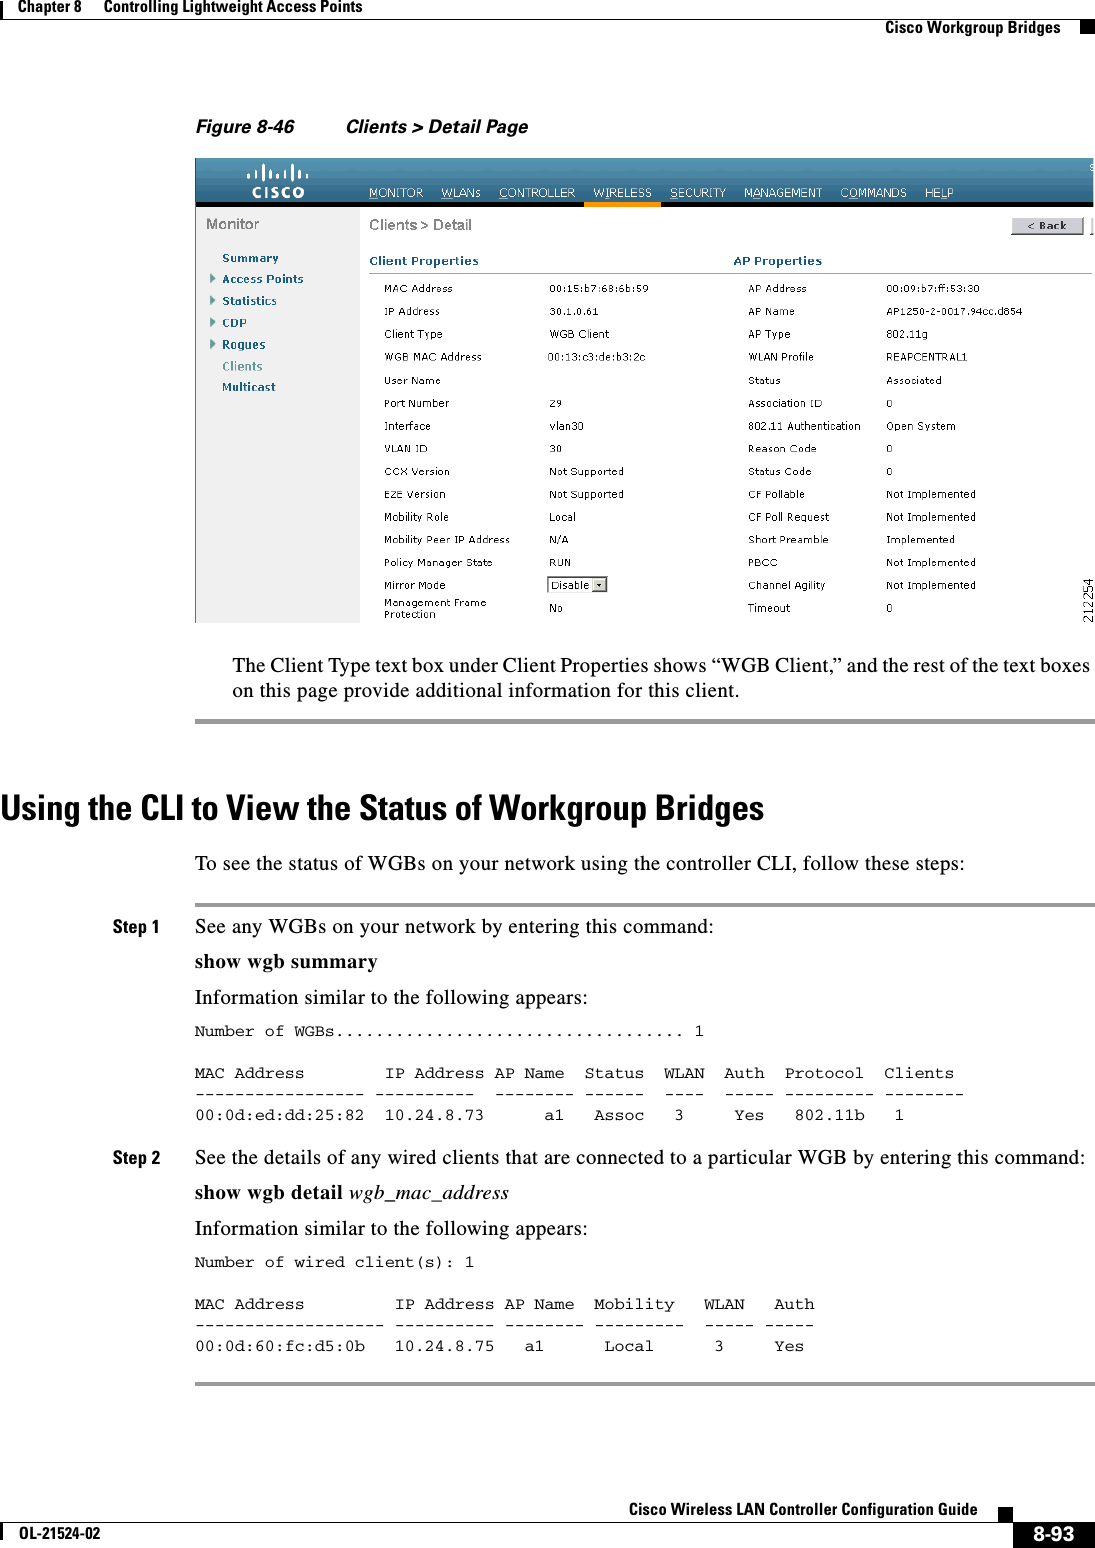  8-93Cisco Wireless LAN Controller Configuration GuideOL-21524-02Chapter 8      Controlling Lightweight Access Points  Cisco Workgroup BridgesFigure 8-46 Clients &gt; Detail PageThe Client Type text box under Client Properties shows “WGB Client,” and the rest of the text boxes on this page provide additional information for this client.Using the CLI to View the Status of Workgroup BridgesTo see the status of WGBs on your network using the controller CLI, follow these steps:Step 1 See any WGBs on your network by entering this command:show wgb summaryInformation similar to the following appears:Number of WGBs................................... 1 MAC Address        IP Address AP Name  Status  WLAN  Auth  Protocol  Clients----------------- ----------  -------- ------  ----  ----- --------- -------- 00:0d:ed:dd:25:82  10.24.8.73      a1   Assoc   3     Yes   802.11b   1 Step 2 See the details of any wired clients that are connected to a particular WGB by entering this command:show wgb detail wgb_mac_addressInformation similar to the following appears:Number of wired client(s): 1 MAC Address         IP Address AP Name  Mobility   WLAN   Auth------------------- ---------- -------- ---------  ----- -----00:0d:60:fc:d5:0b   10.24.8.75   a1      Local      3     Yes 